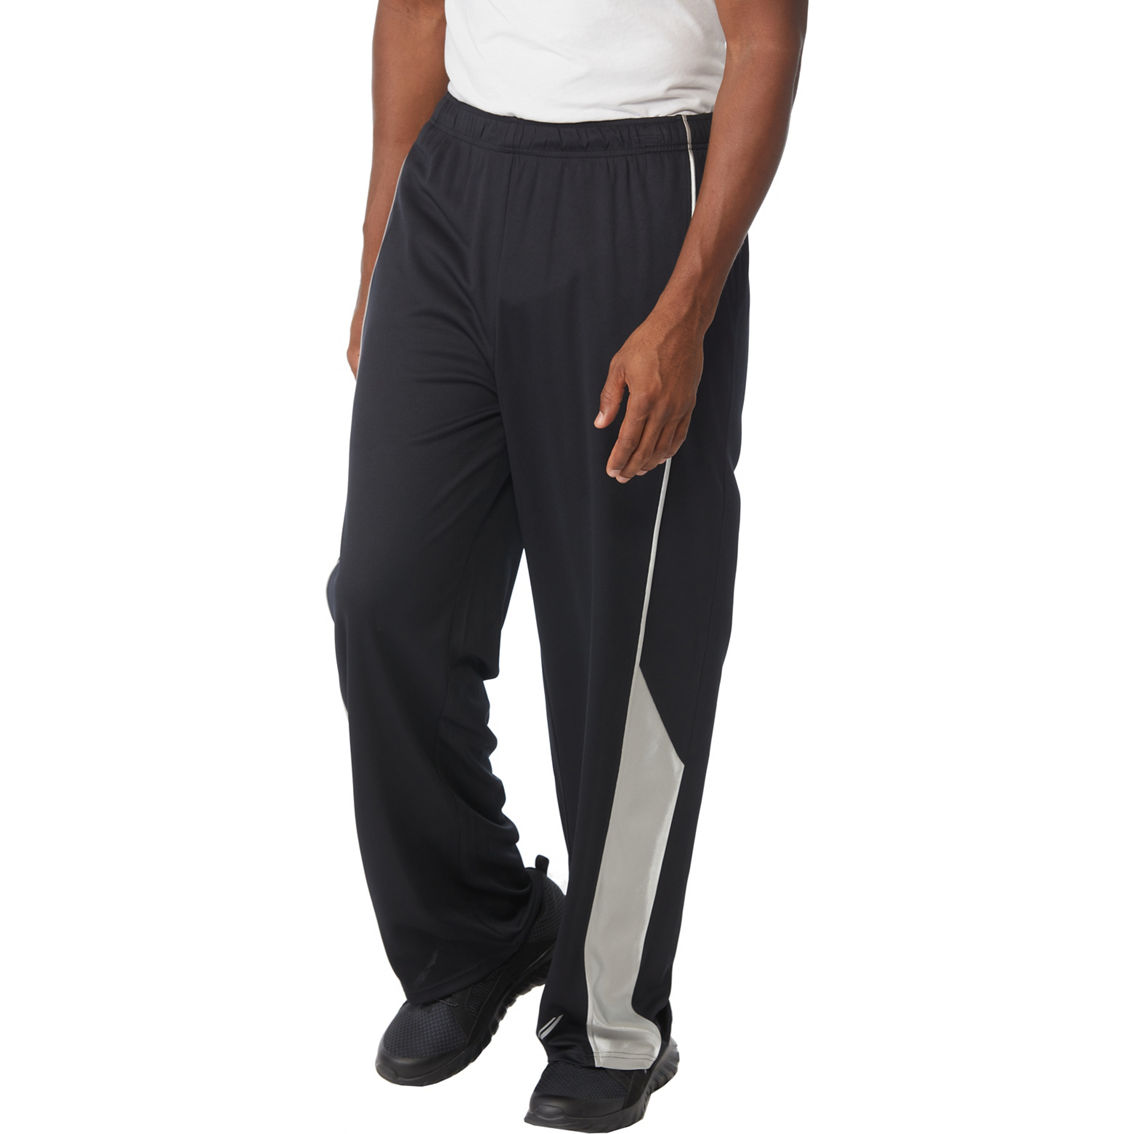 Pbx Pro Polyester Pants | Pants | Clothing & Accessories | Shop The ...